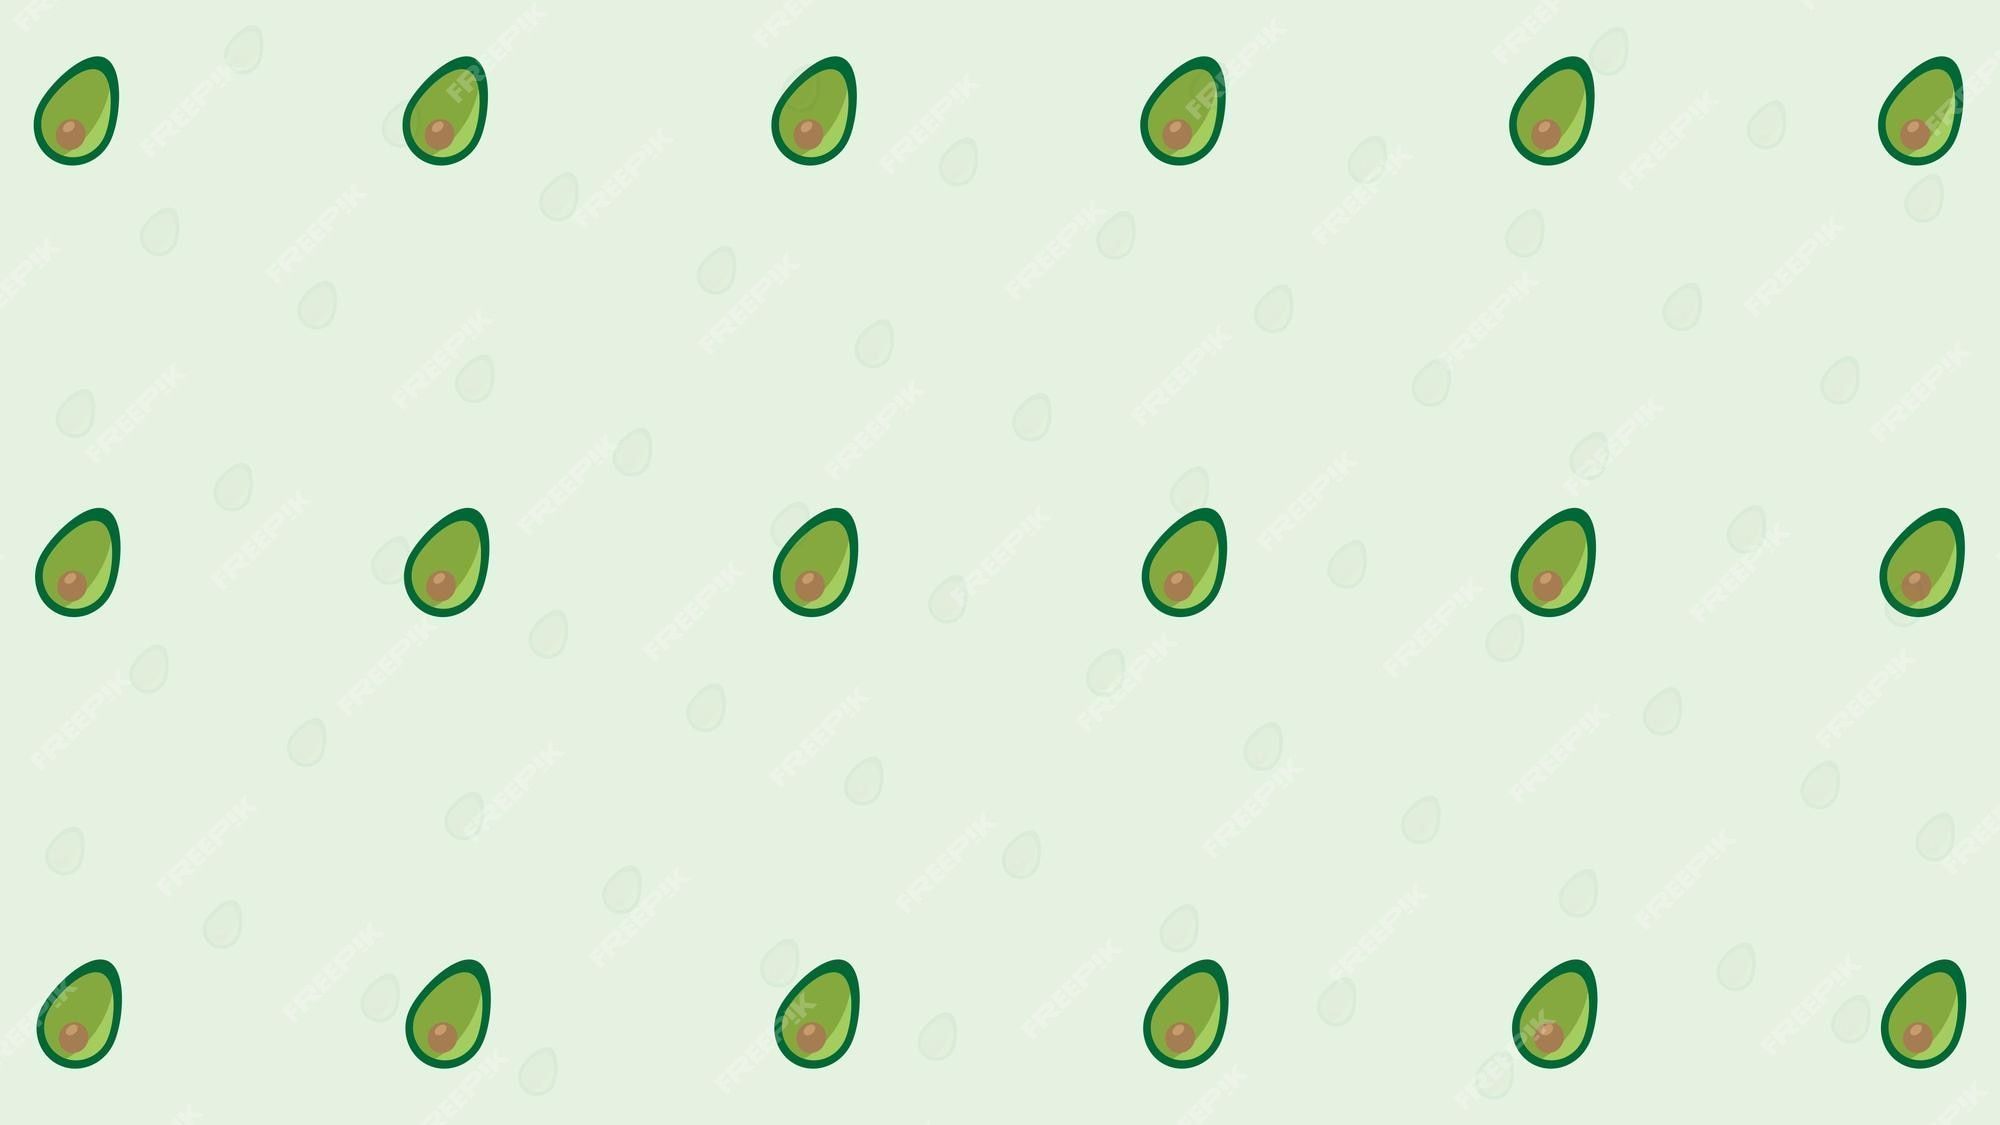 Premium Vector. Cute green avocado pattern background fruit pattern background perfect for wallpaper backdrop